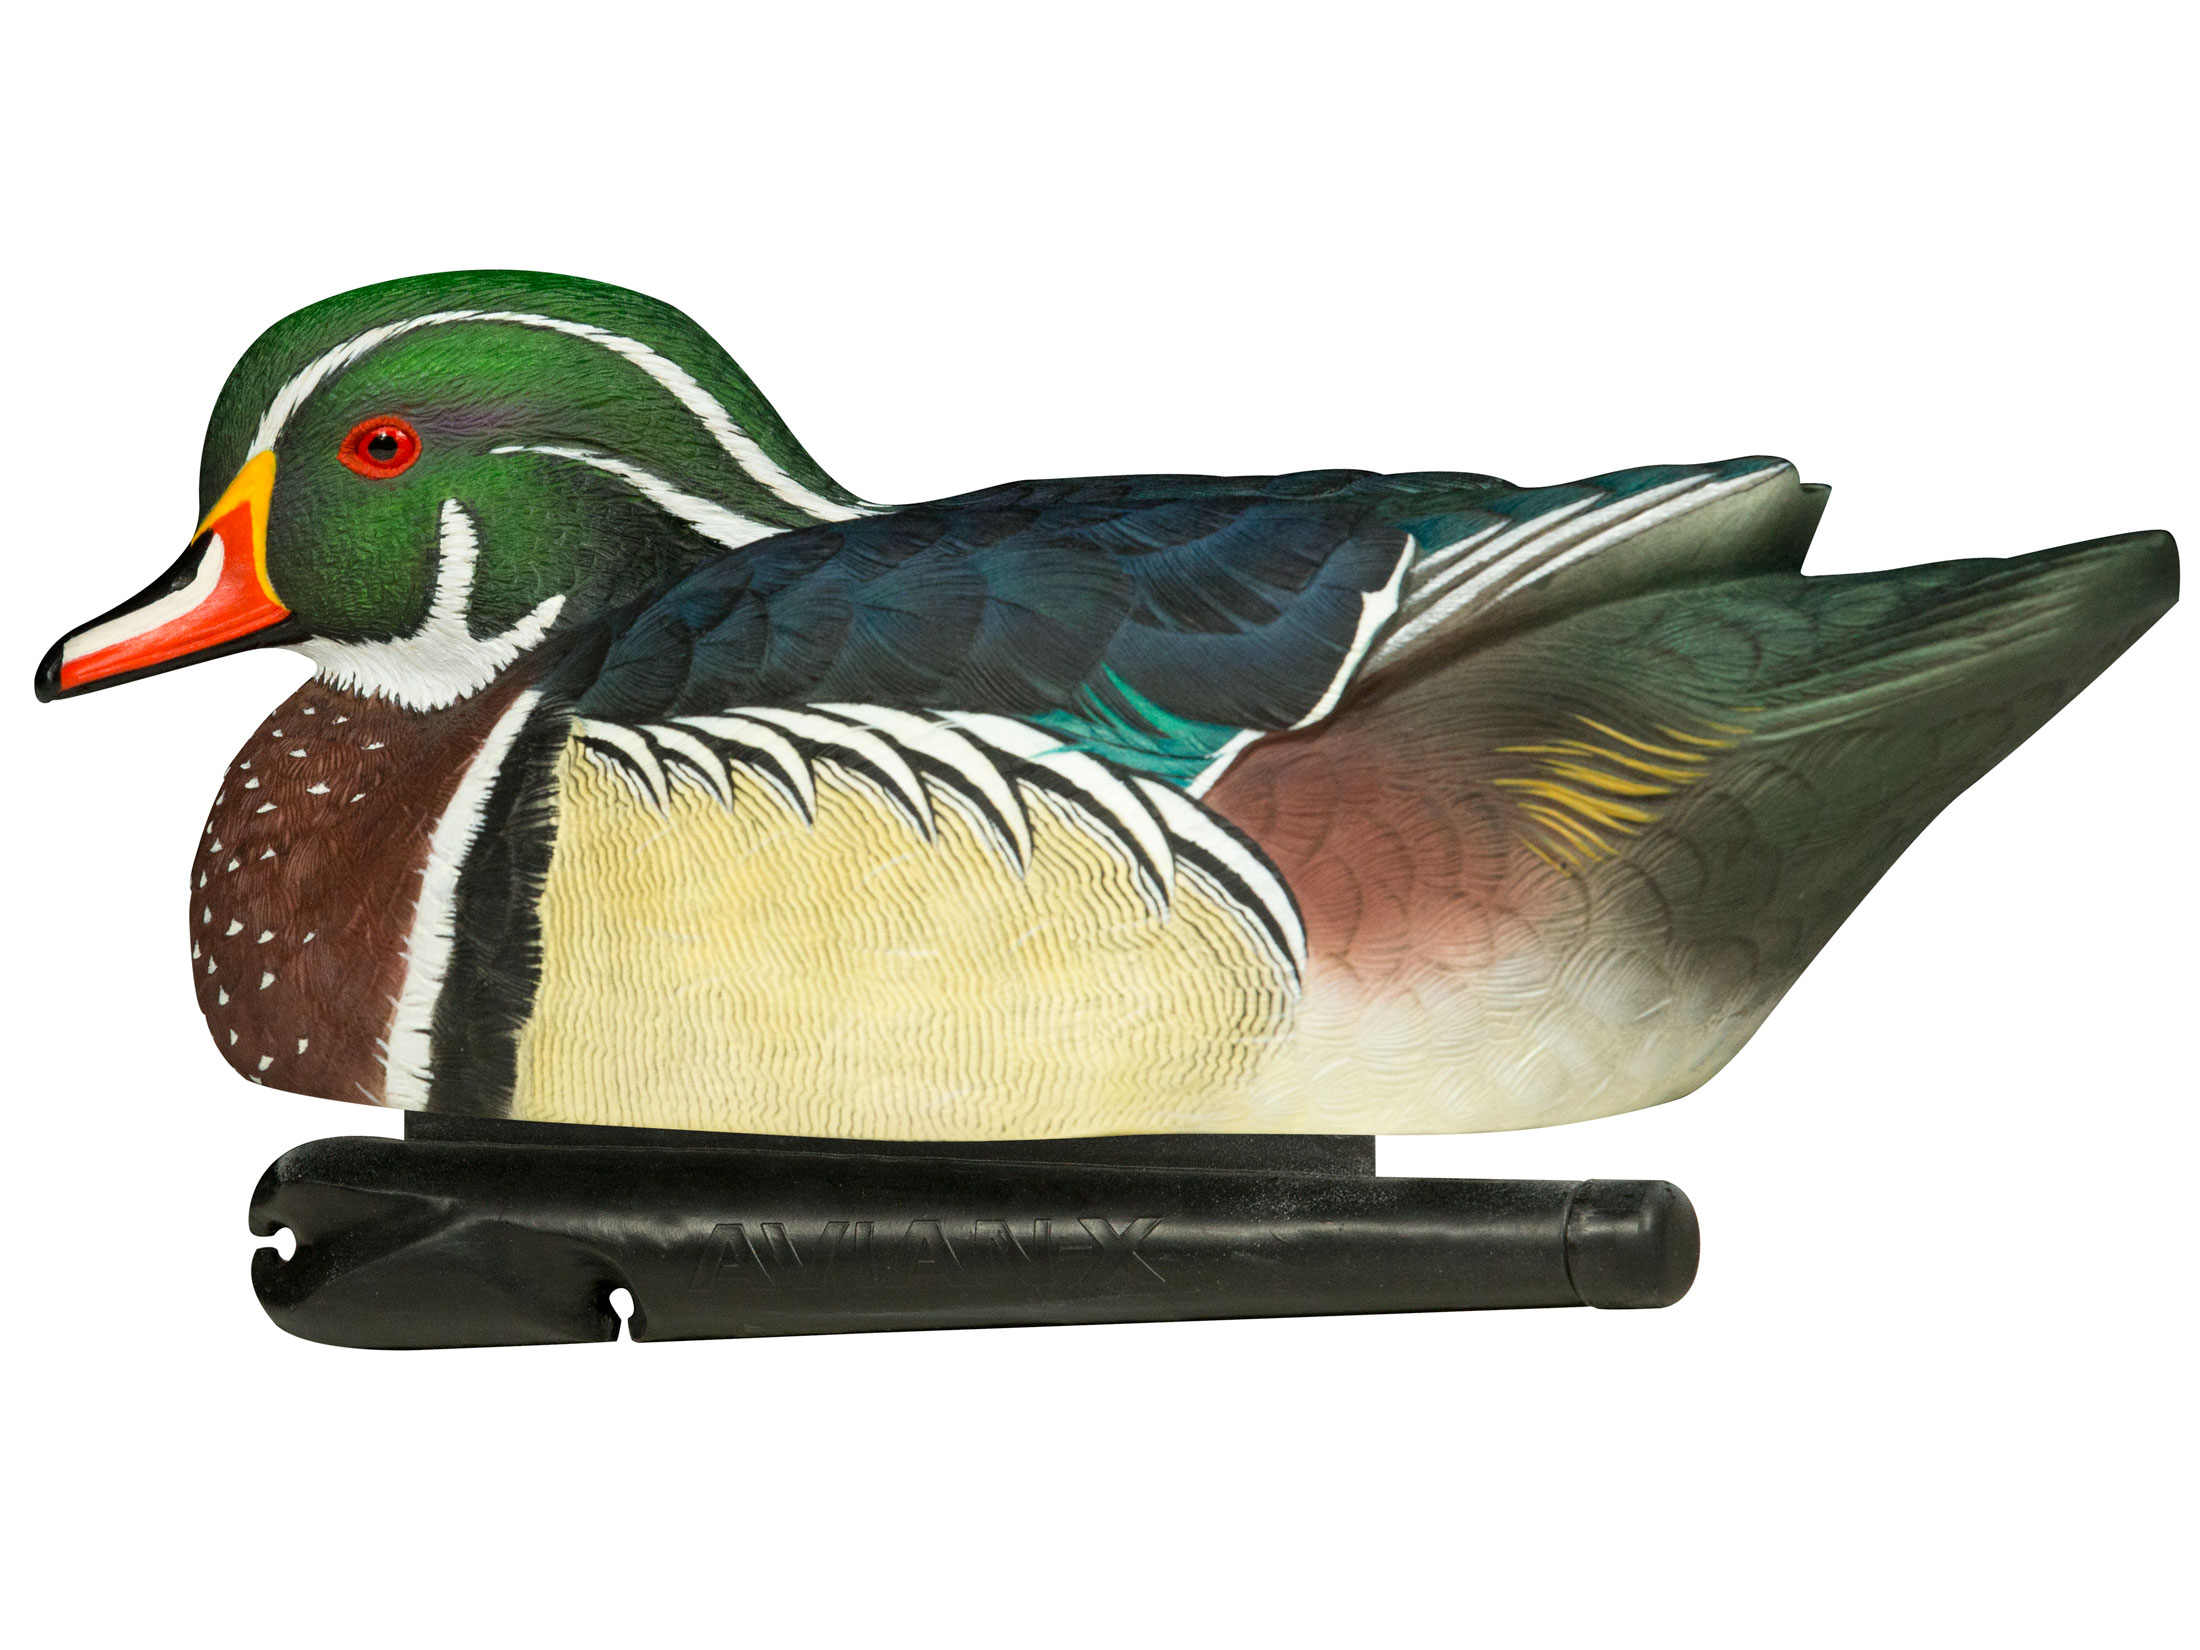 Avian-X Top Flight Wood Duck Weighted Keel Duck Decoy Pack of 6 For Sale